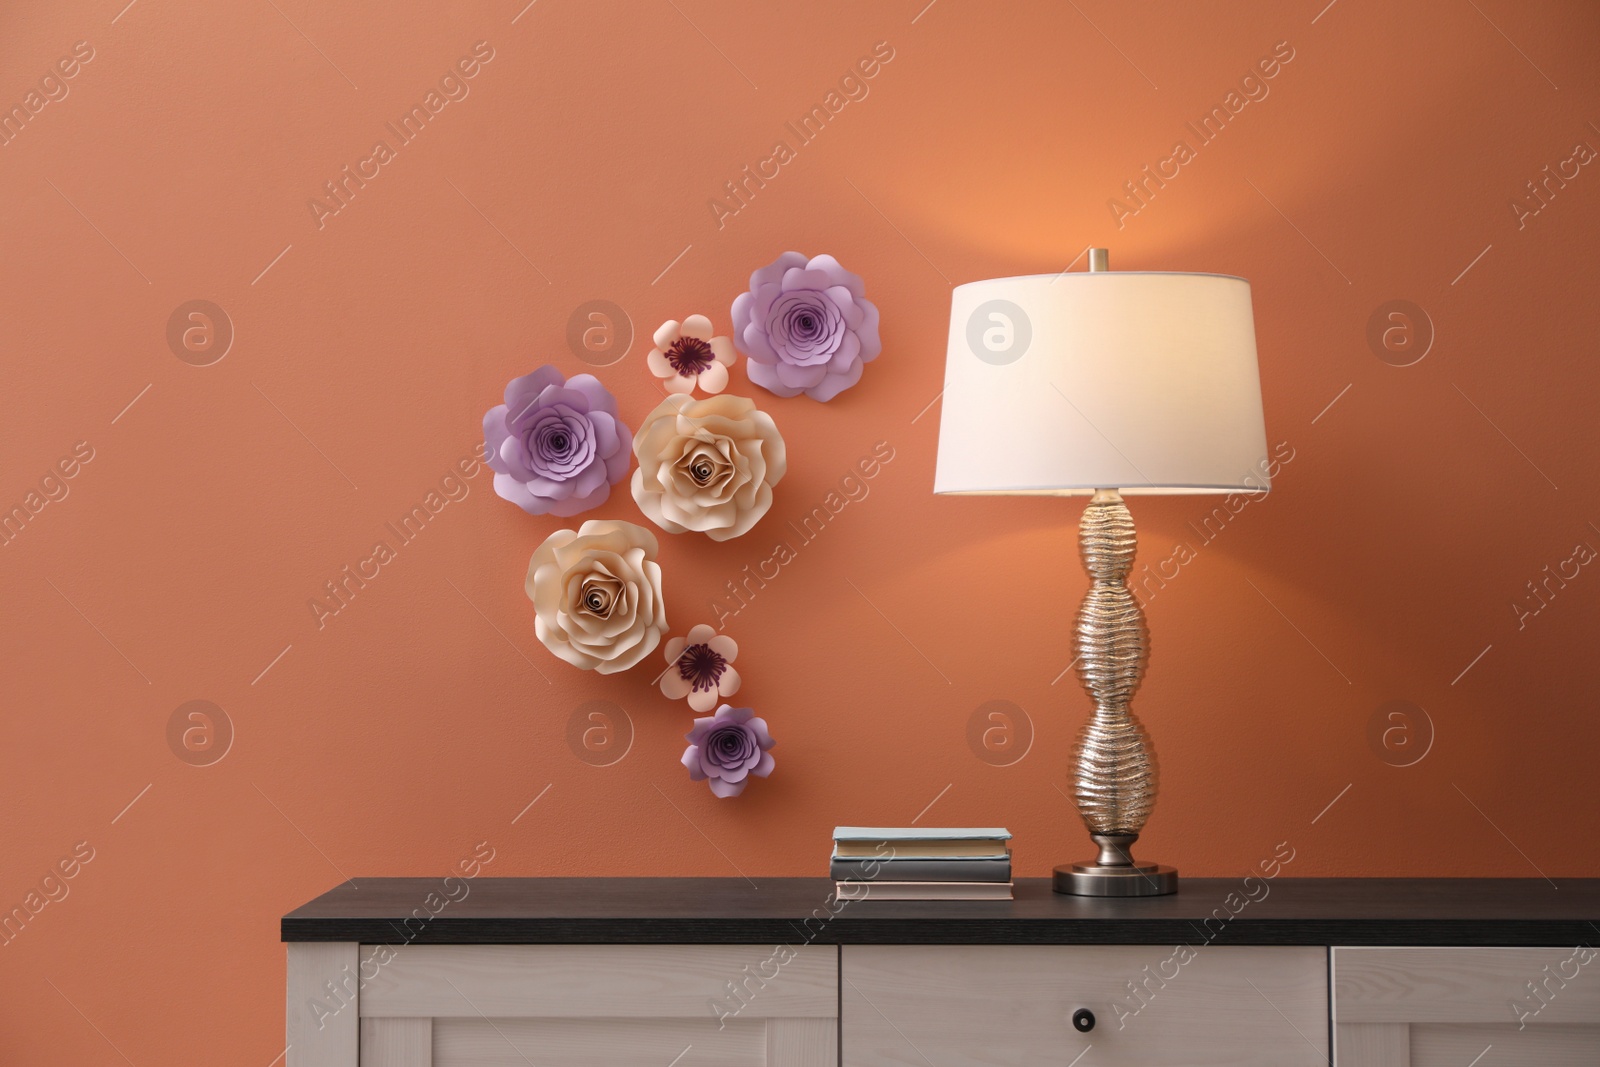 Photo of Lamp and books on cabinet near coral wall with floral decor